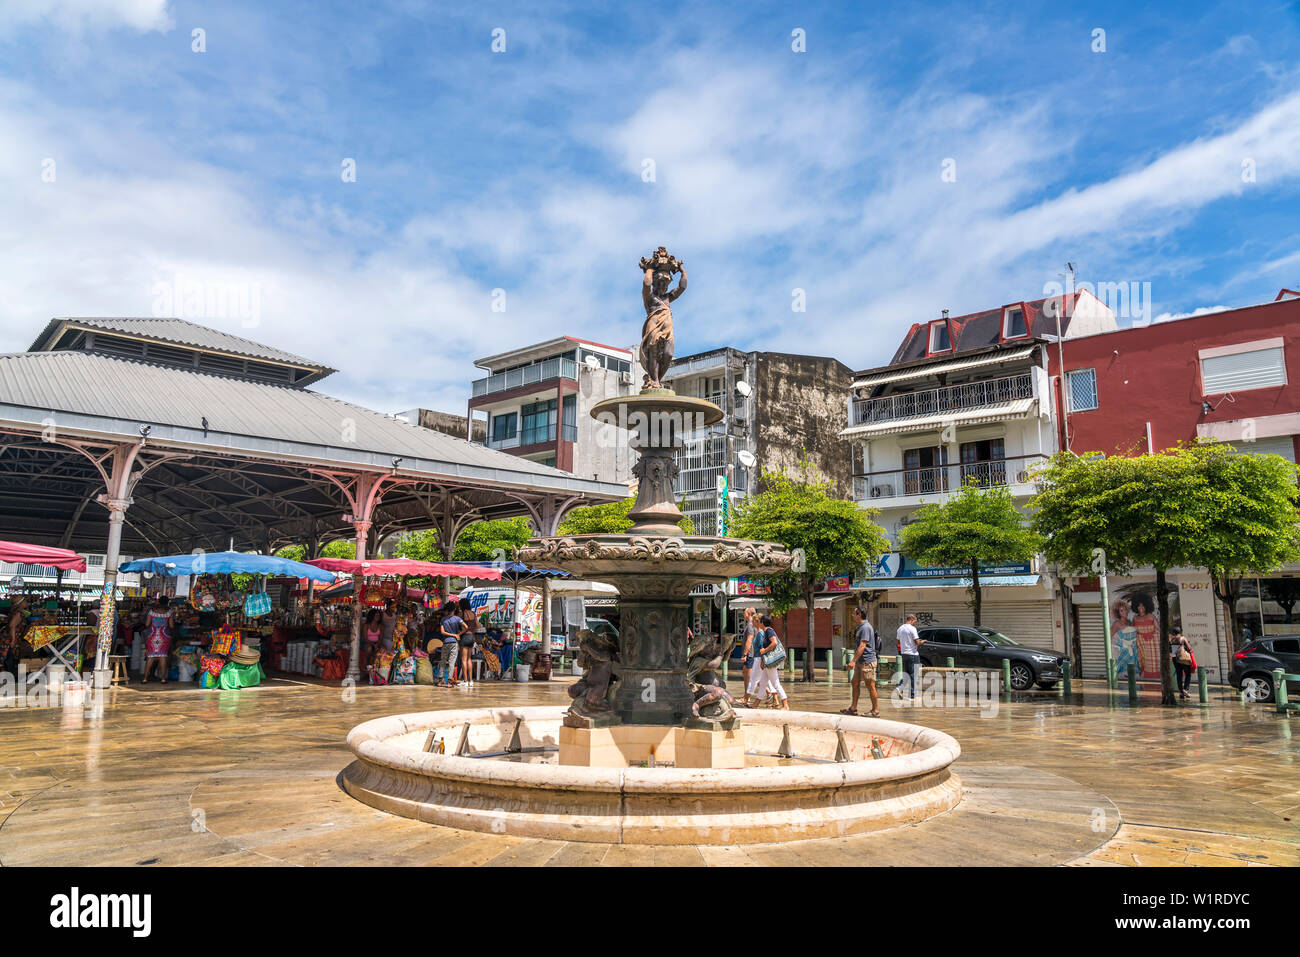 Brunnen in Pointe-a-Pitre, Guadeloupe, Frankreich  | fountain in Pointe-a-Pitre, Guadeloupe, France Stock Photo